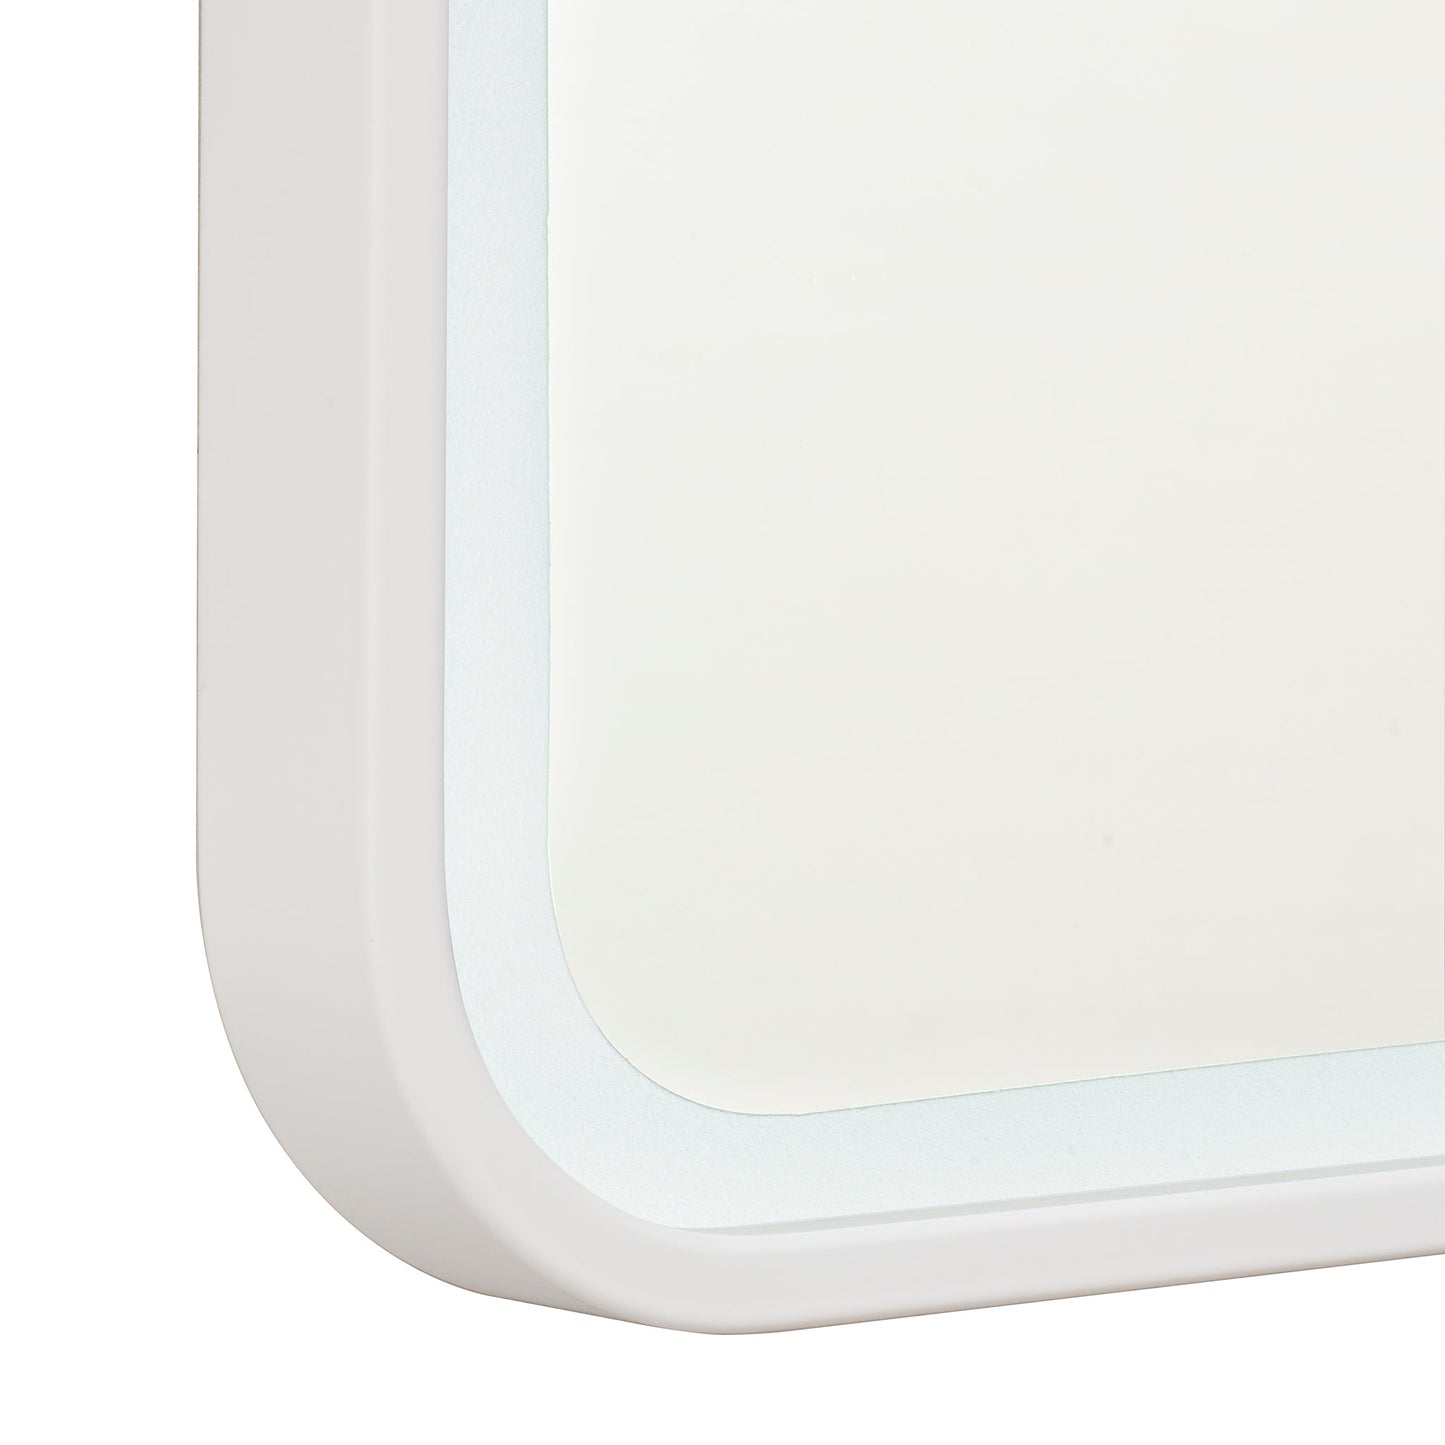 Arco Arch 1150mm x 1000mm Frontlit LED Framed Mirror in Matte White with Demister